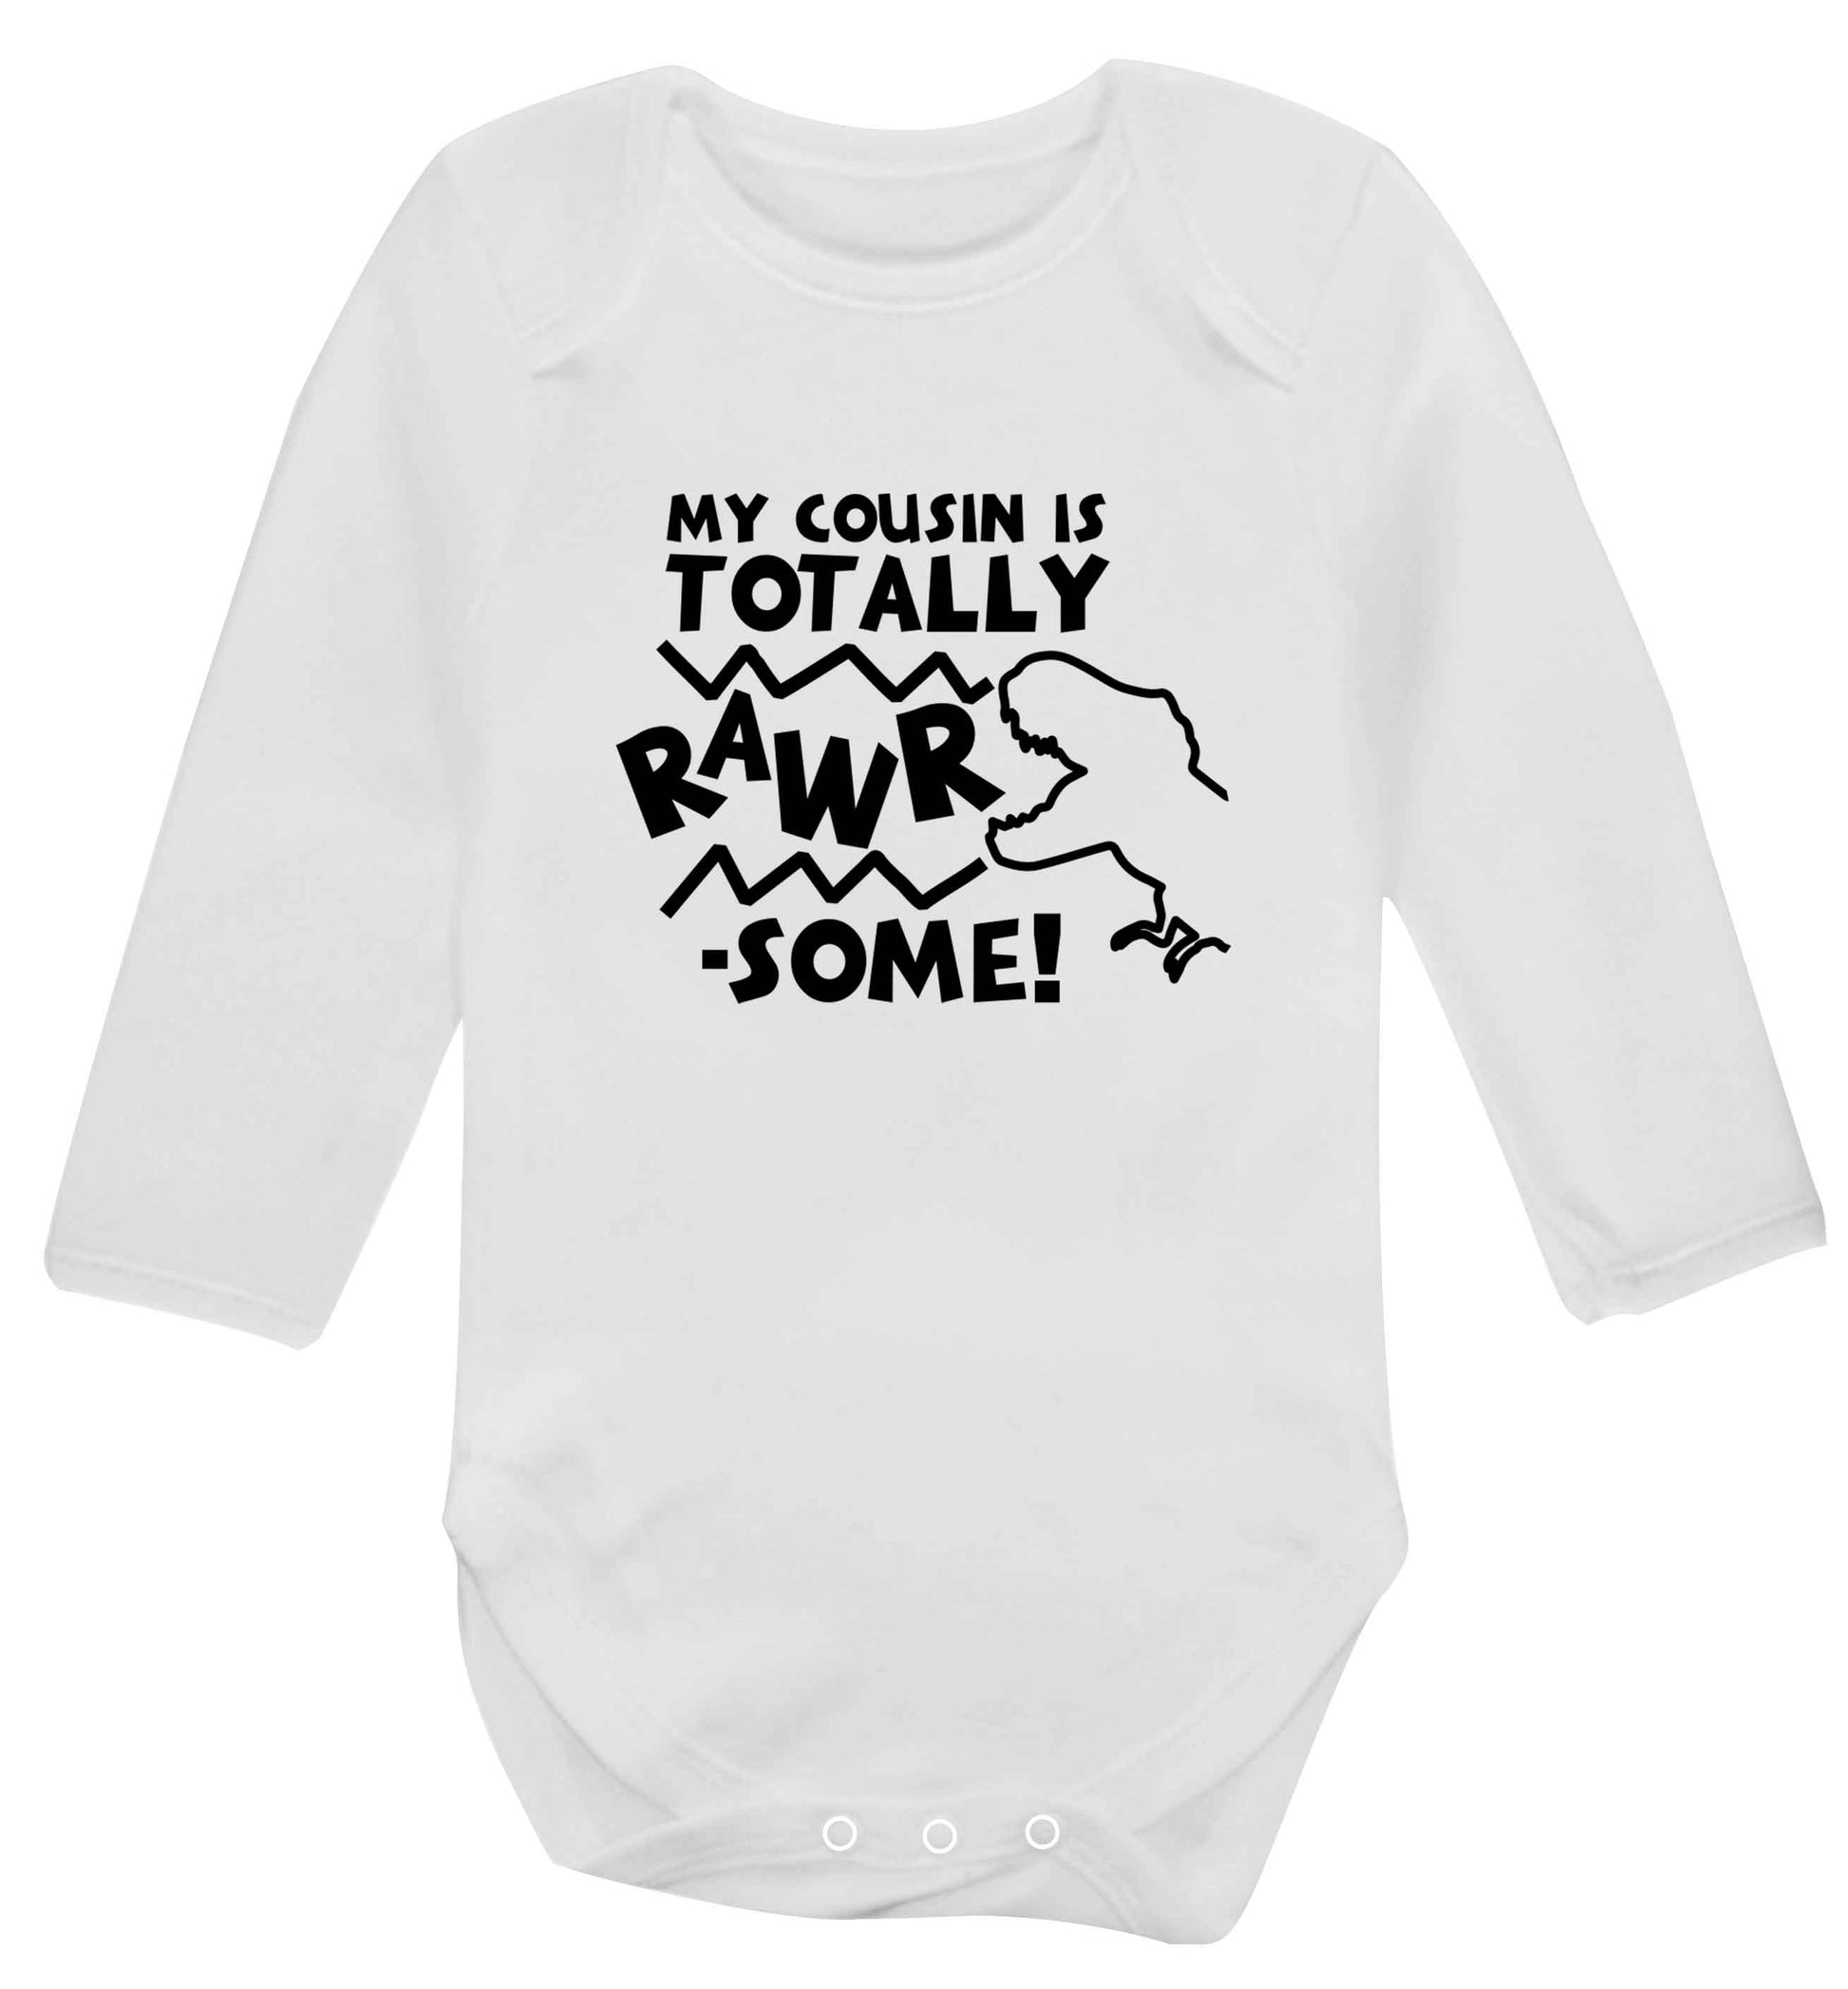 My cousin is totally rawrsome baby vest long sleeved white 6-12 months